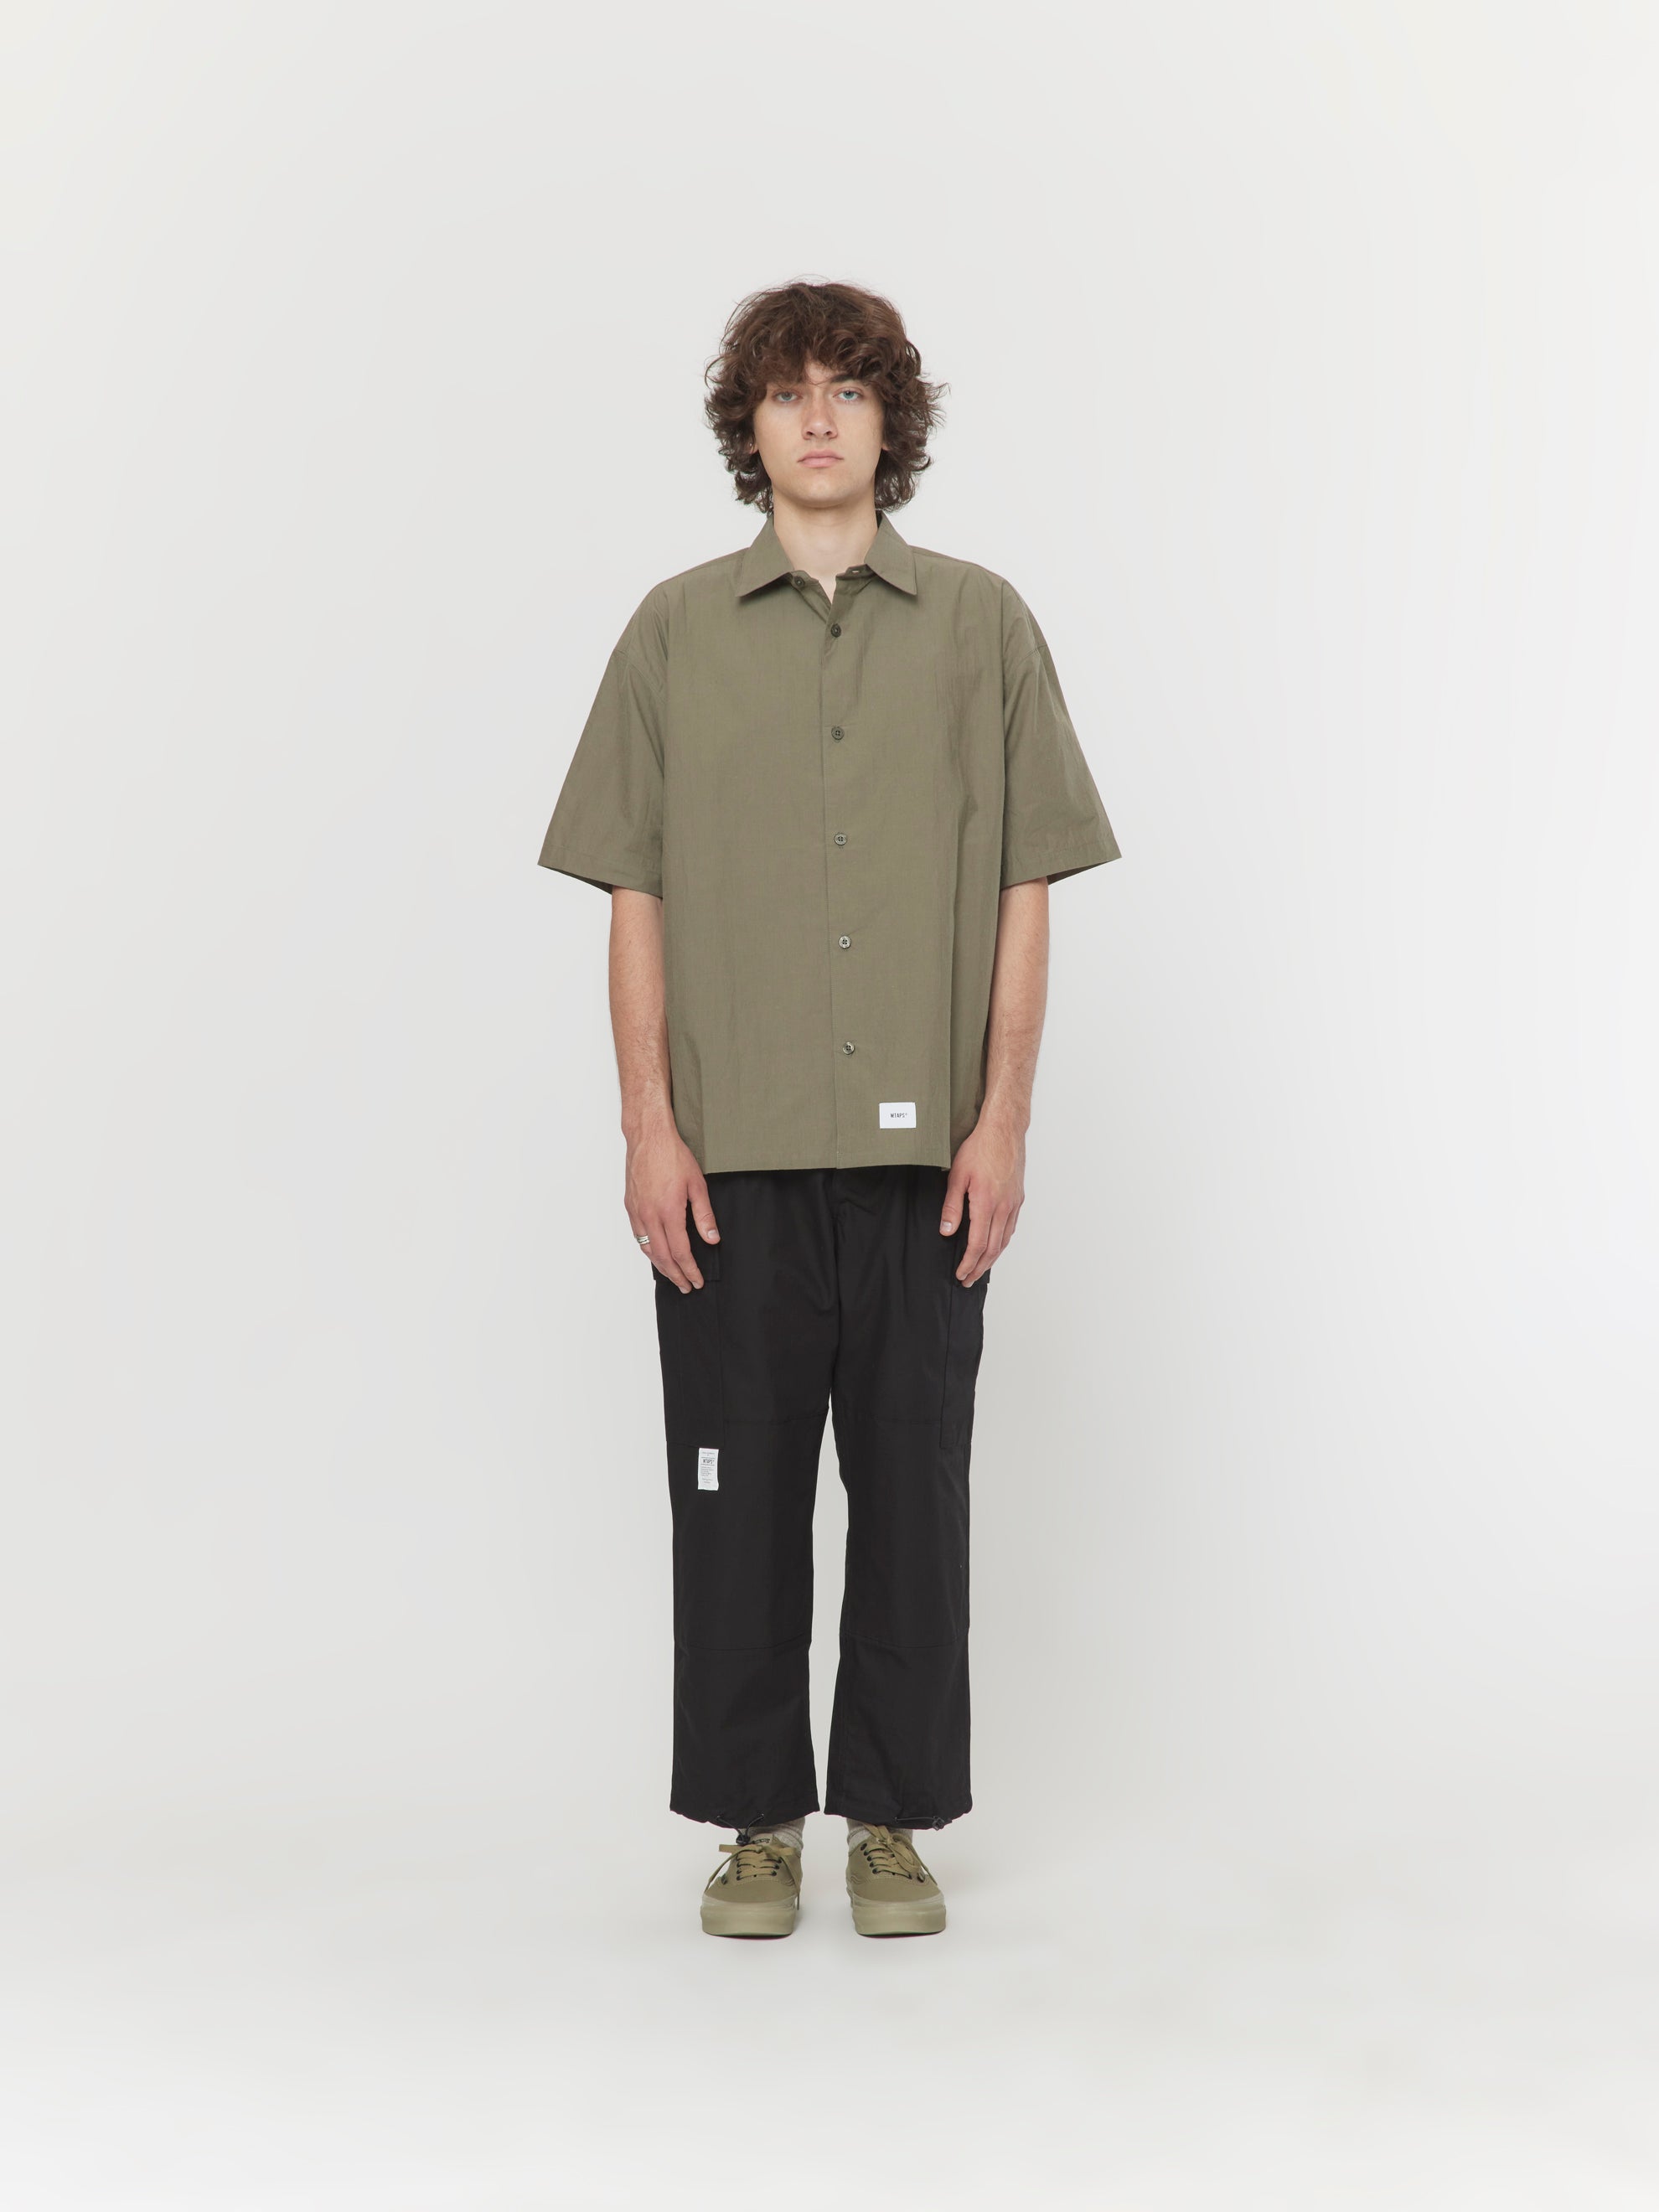 Buy Wtaps SHIRTS 04 Online at UNION LOS ANGELES